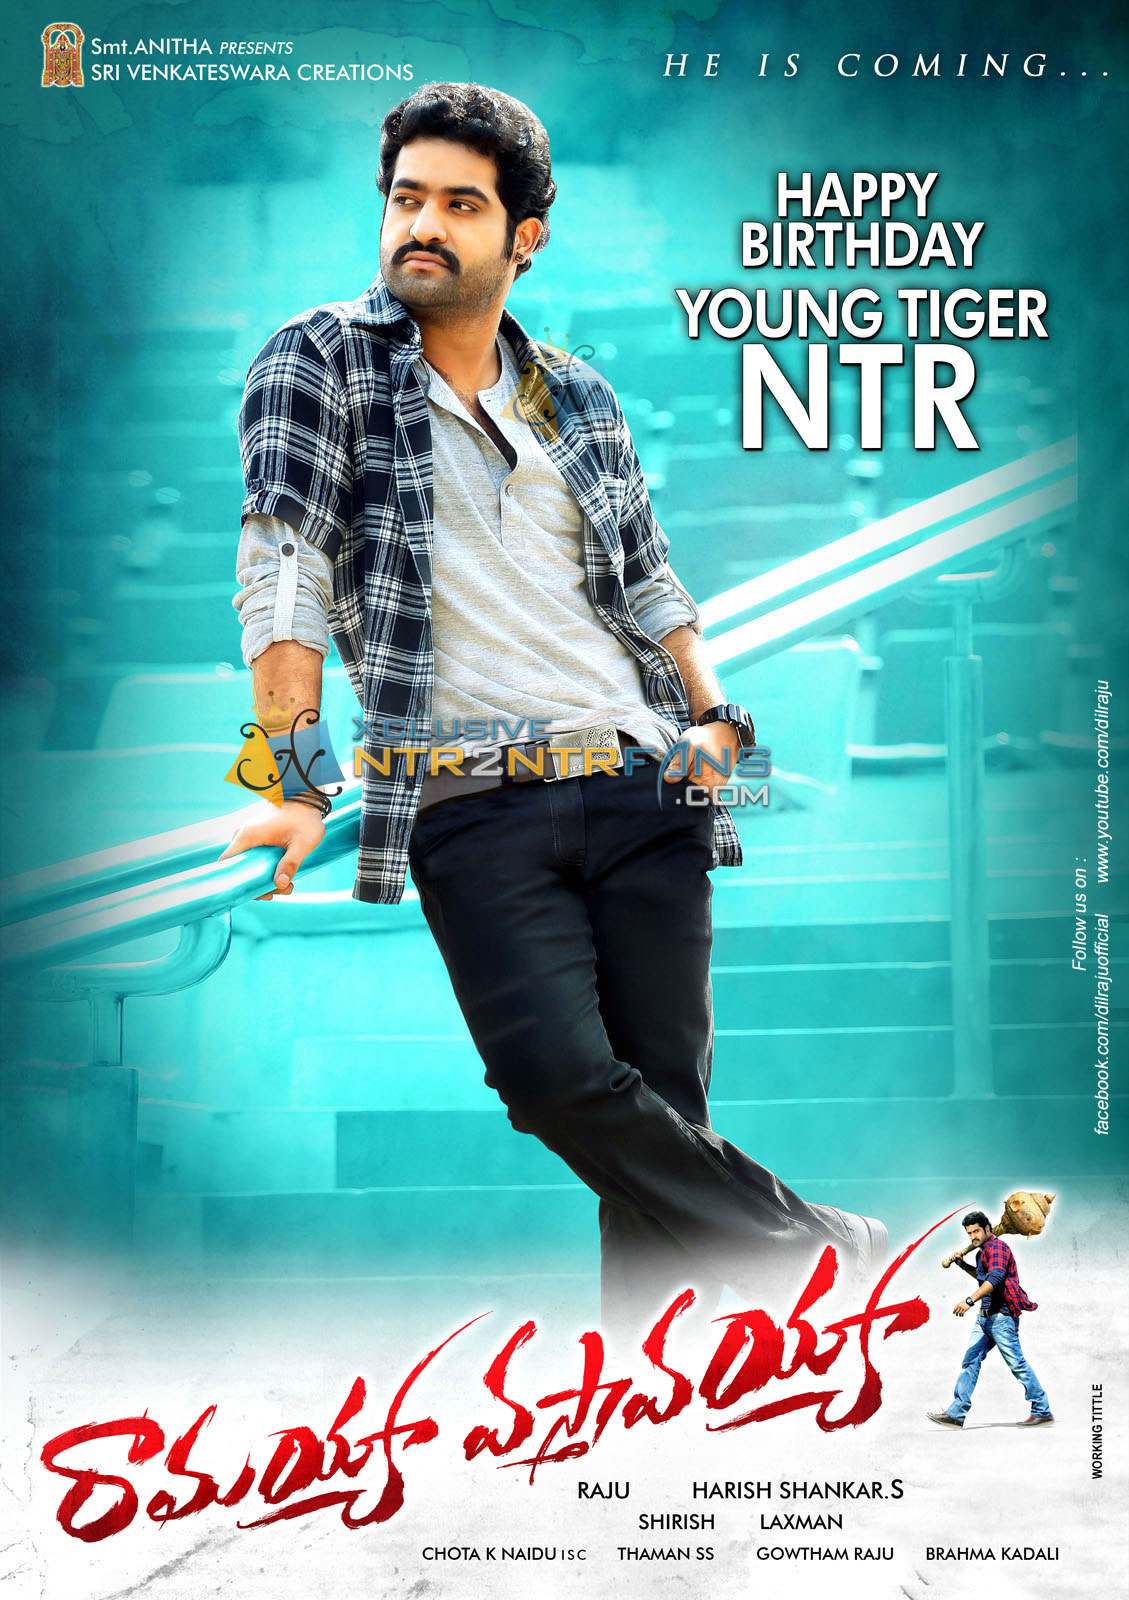 jr ntr wallpapers for mobile,poster,movie,album cover,advertising,song